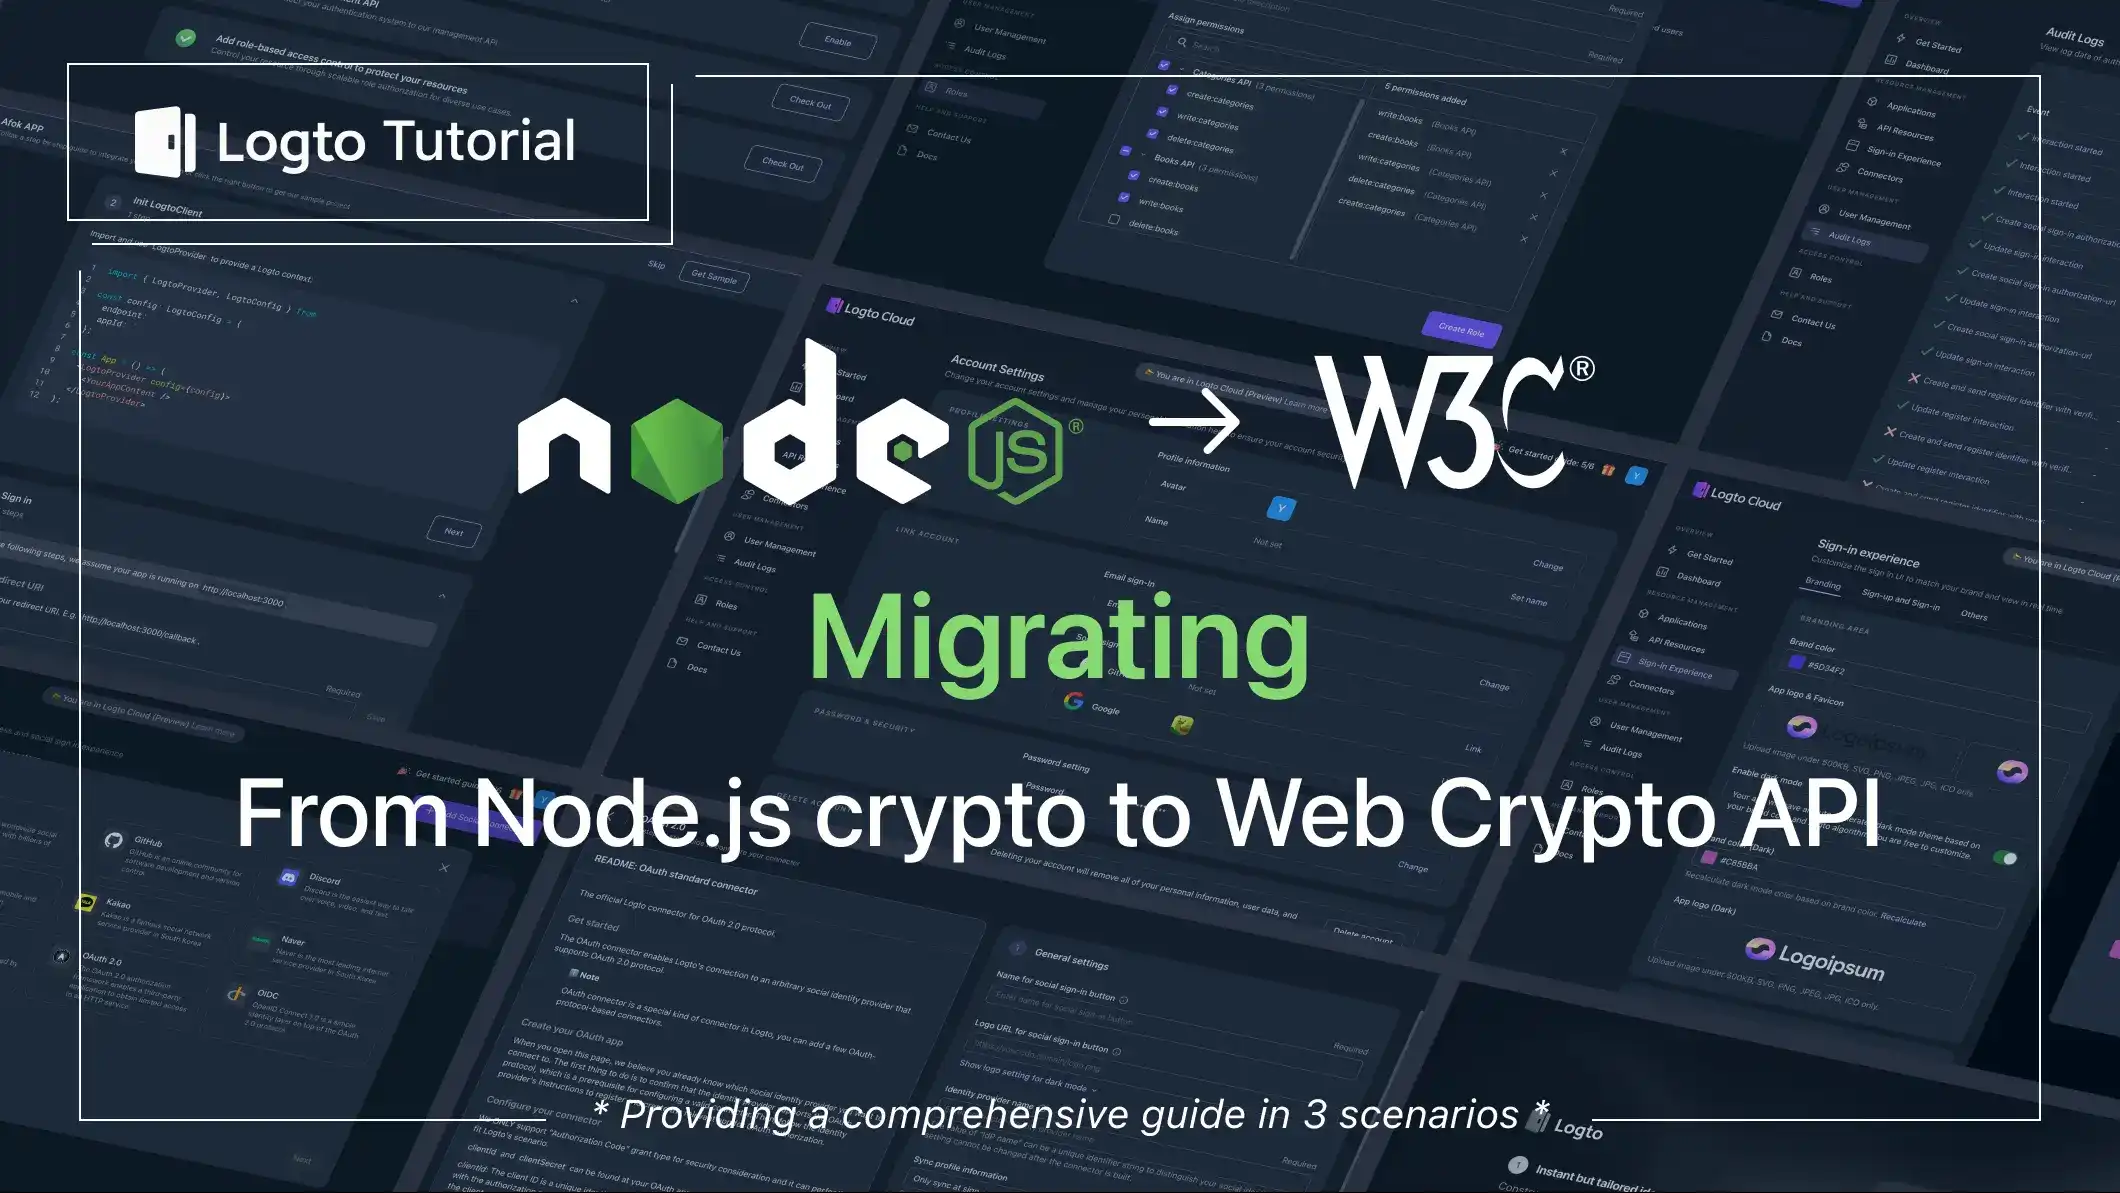 Migrating from Node.js crypto to Web Crypto API: A guided experience